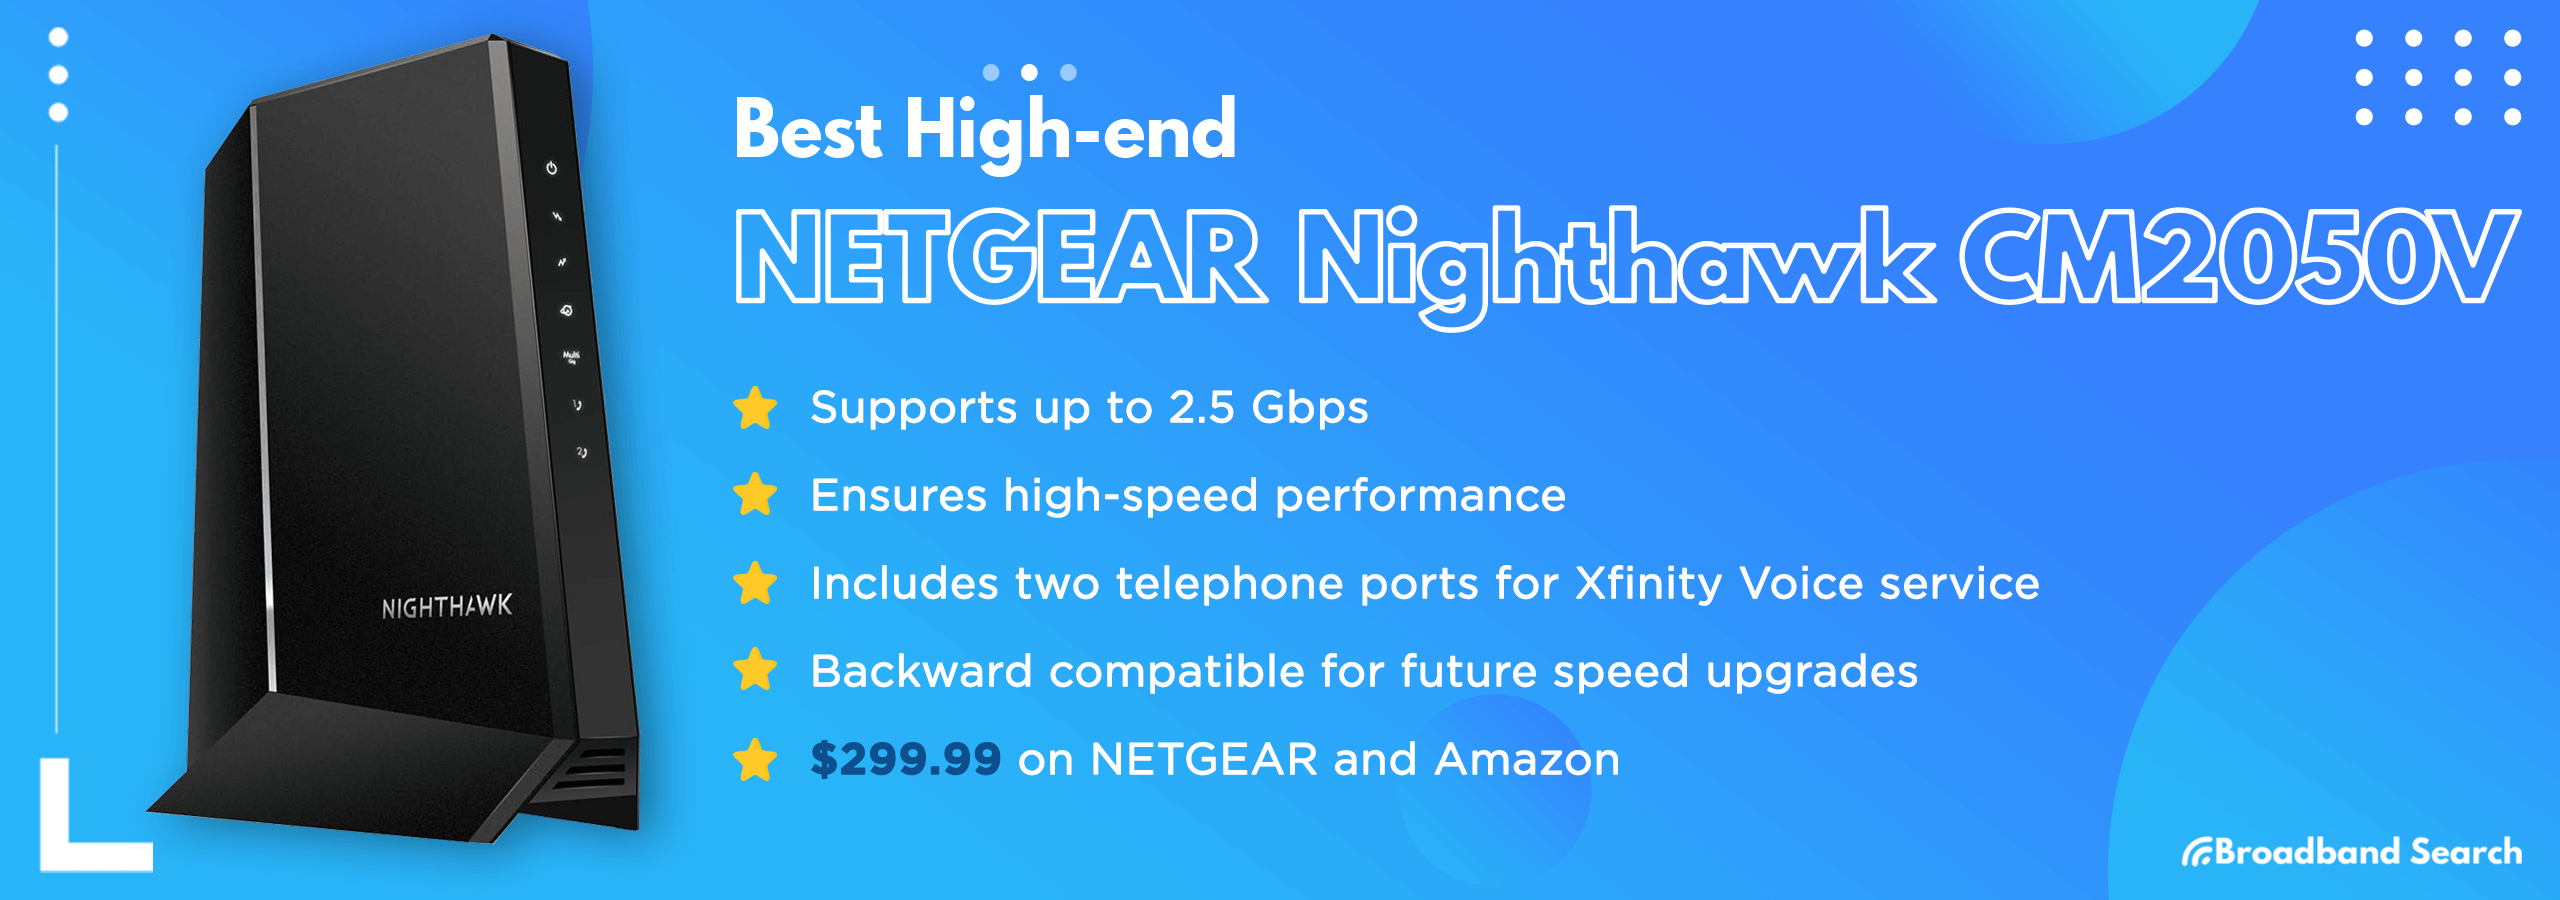 Best High-end modem, NETGEAR Nighthawk CM2050V, with included product details